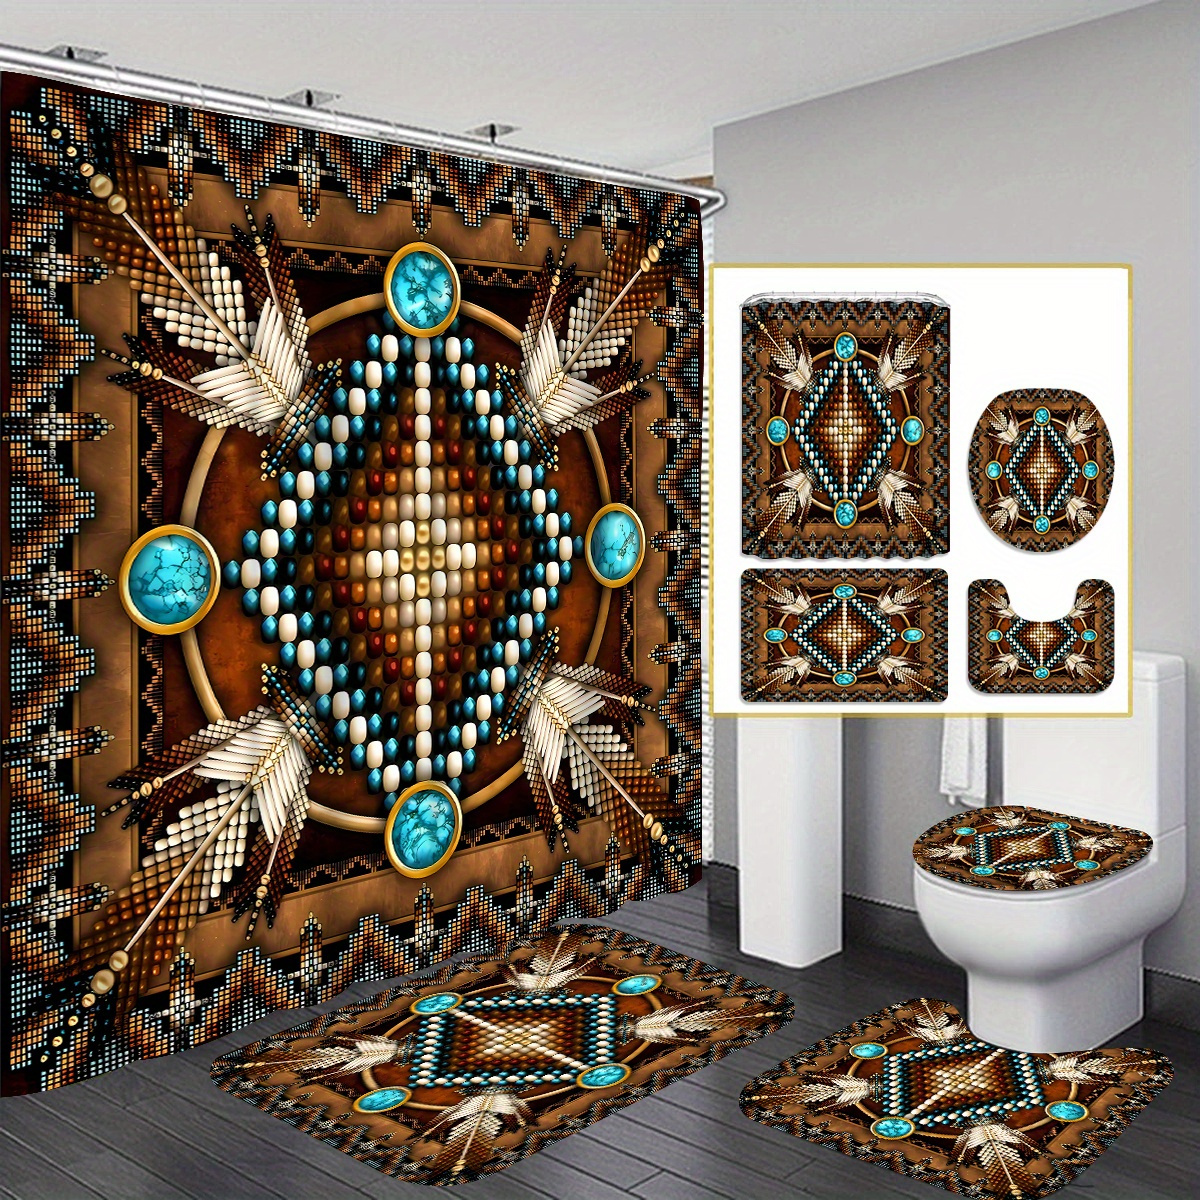 

4pcs Bohemian Style Exquisite Totem Shower Curtain Gift Modern Home Bathroom Decoration Curtain And Toilet Floor Mat 3-piece Set With 12 Shower Curtain Hooks